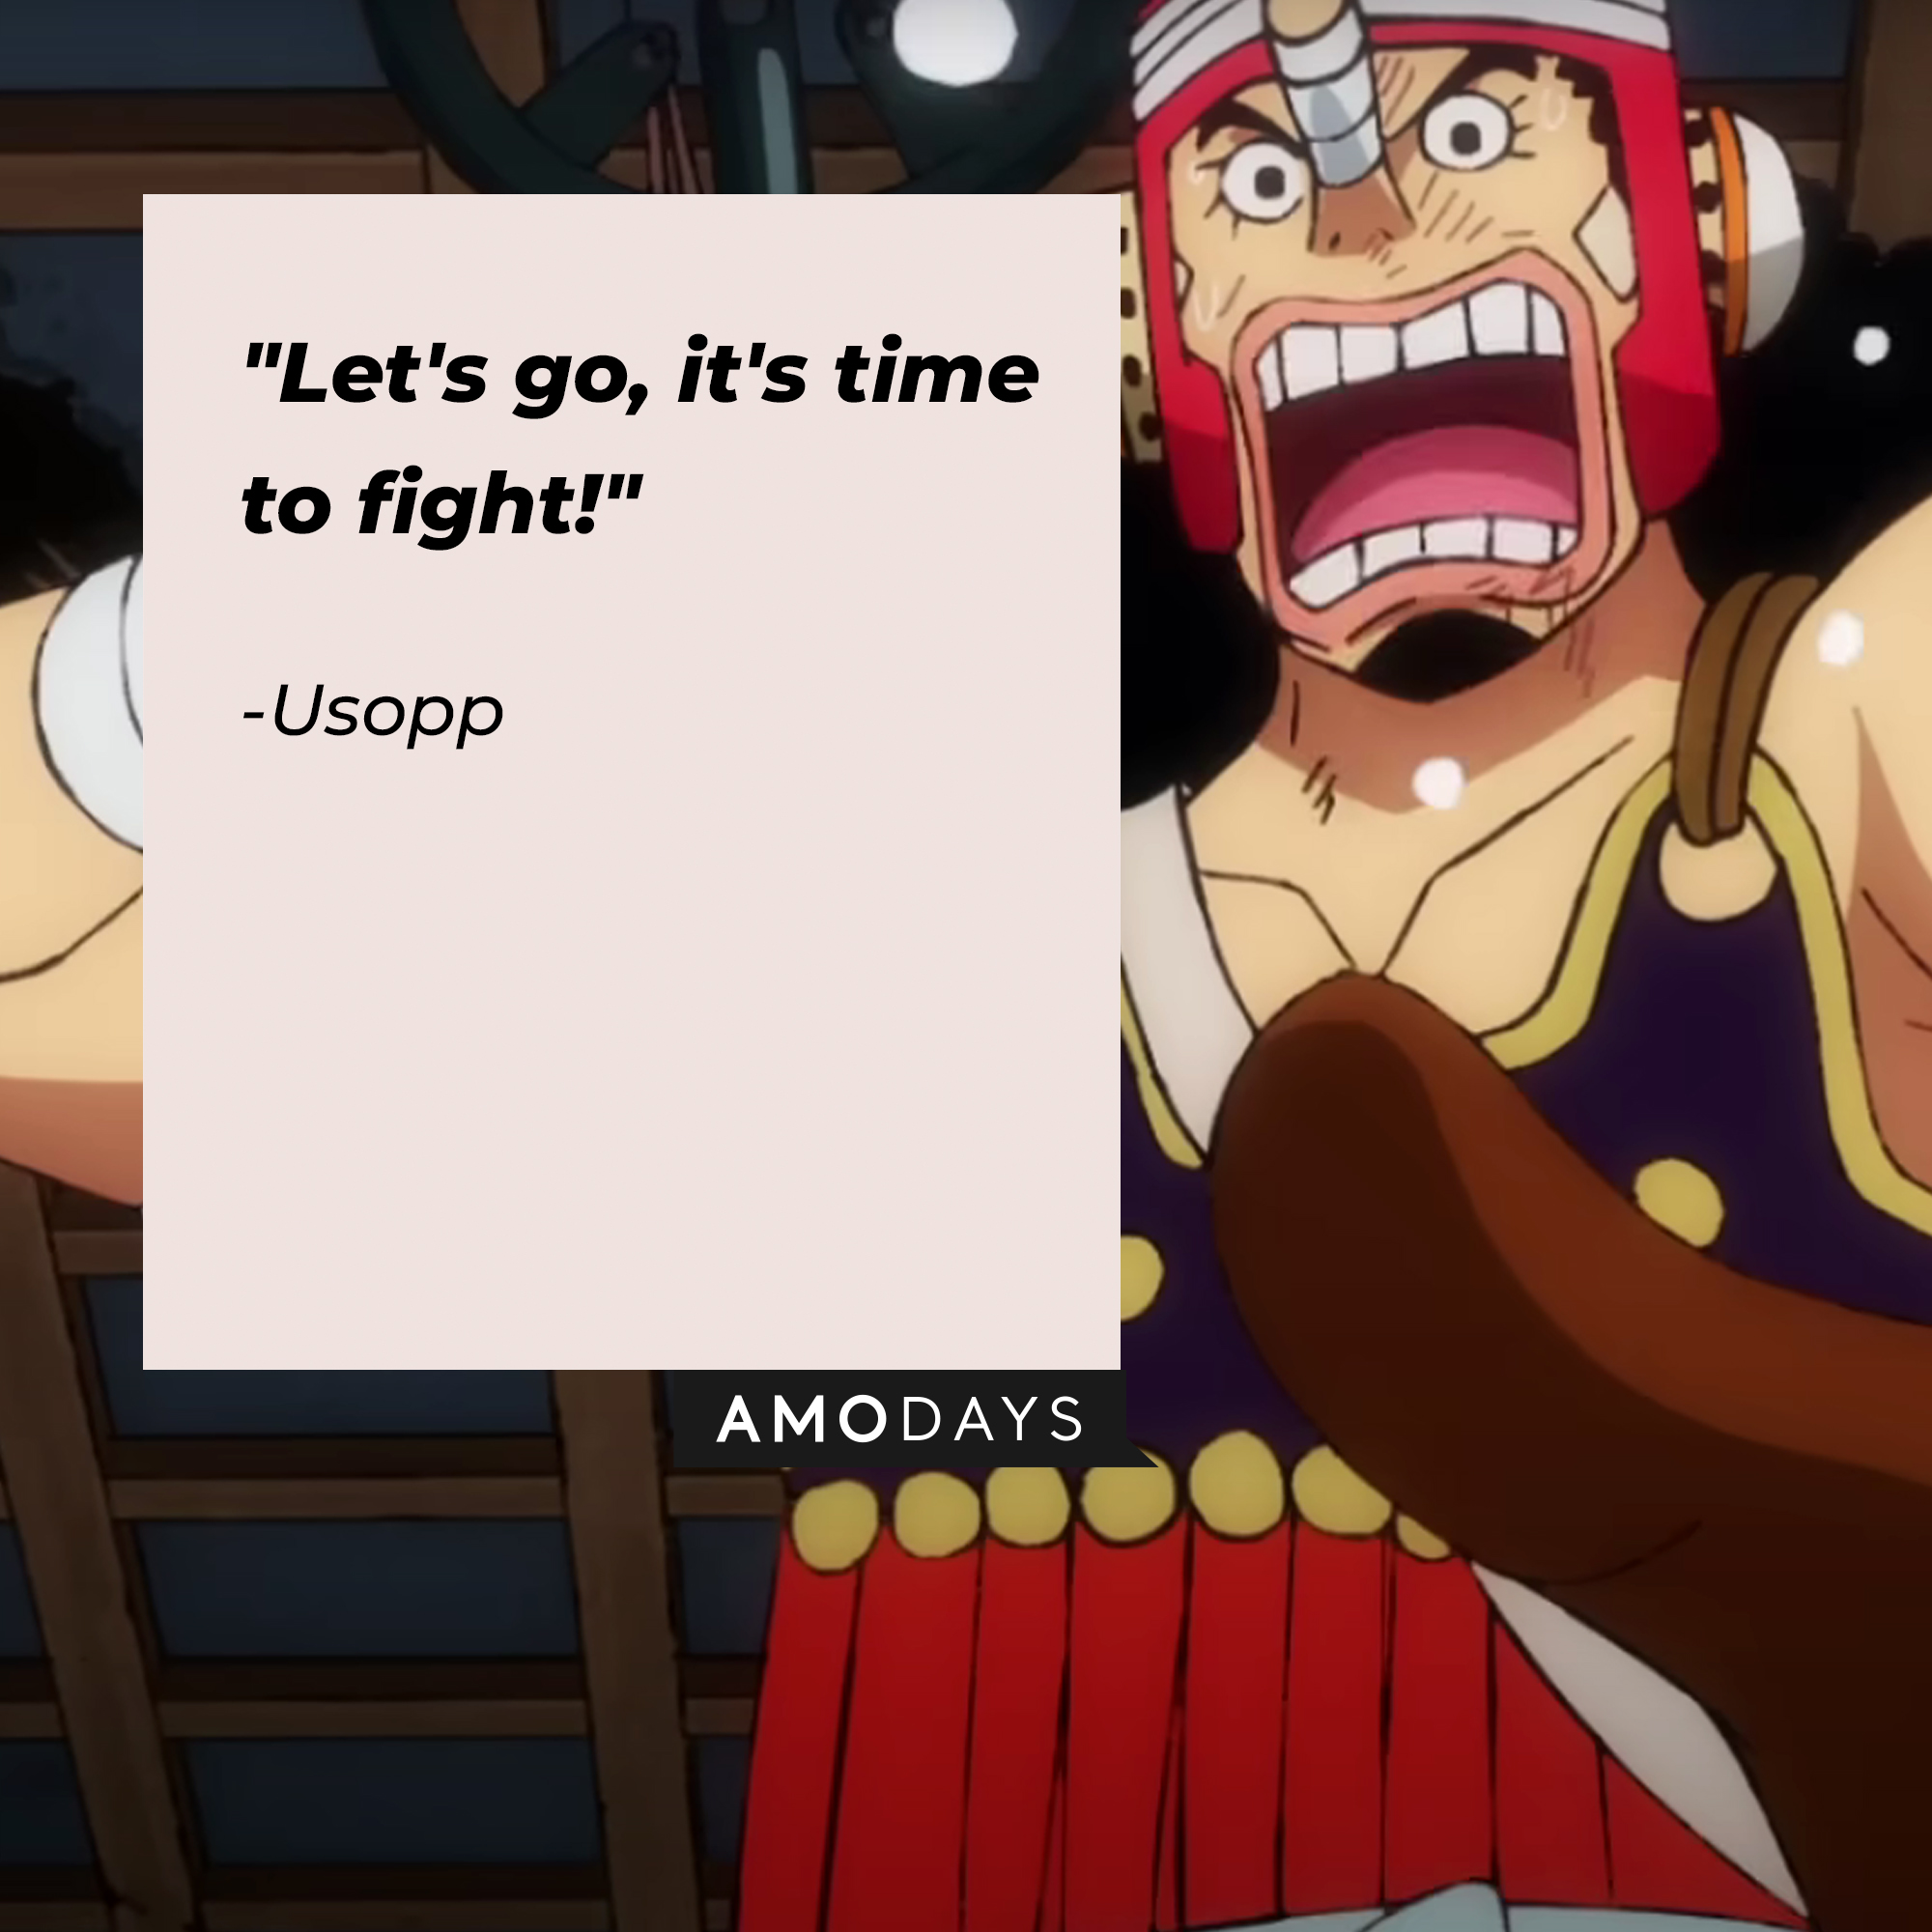 Usopp, with his quote: "Let's go; it's time to fight!" | Source: facebook.com/onepieceofficial